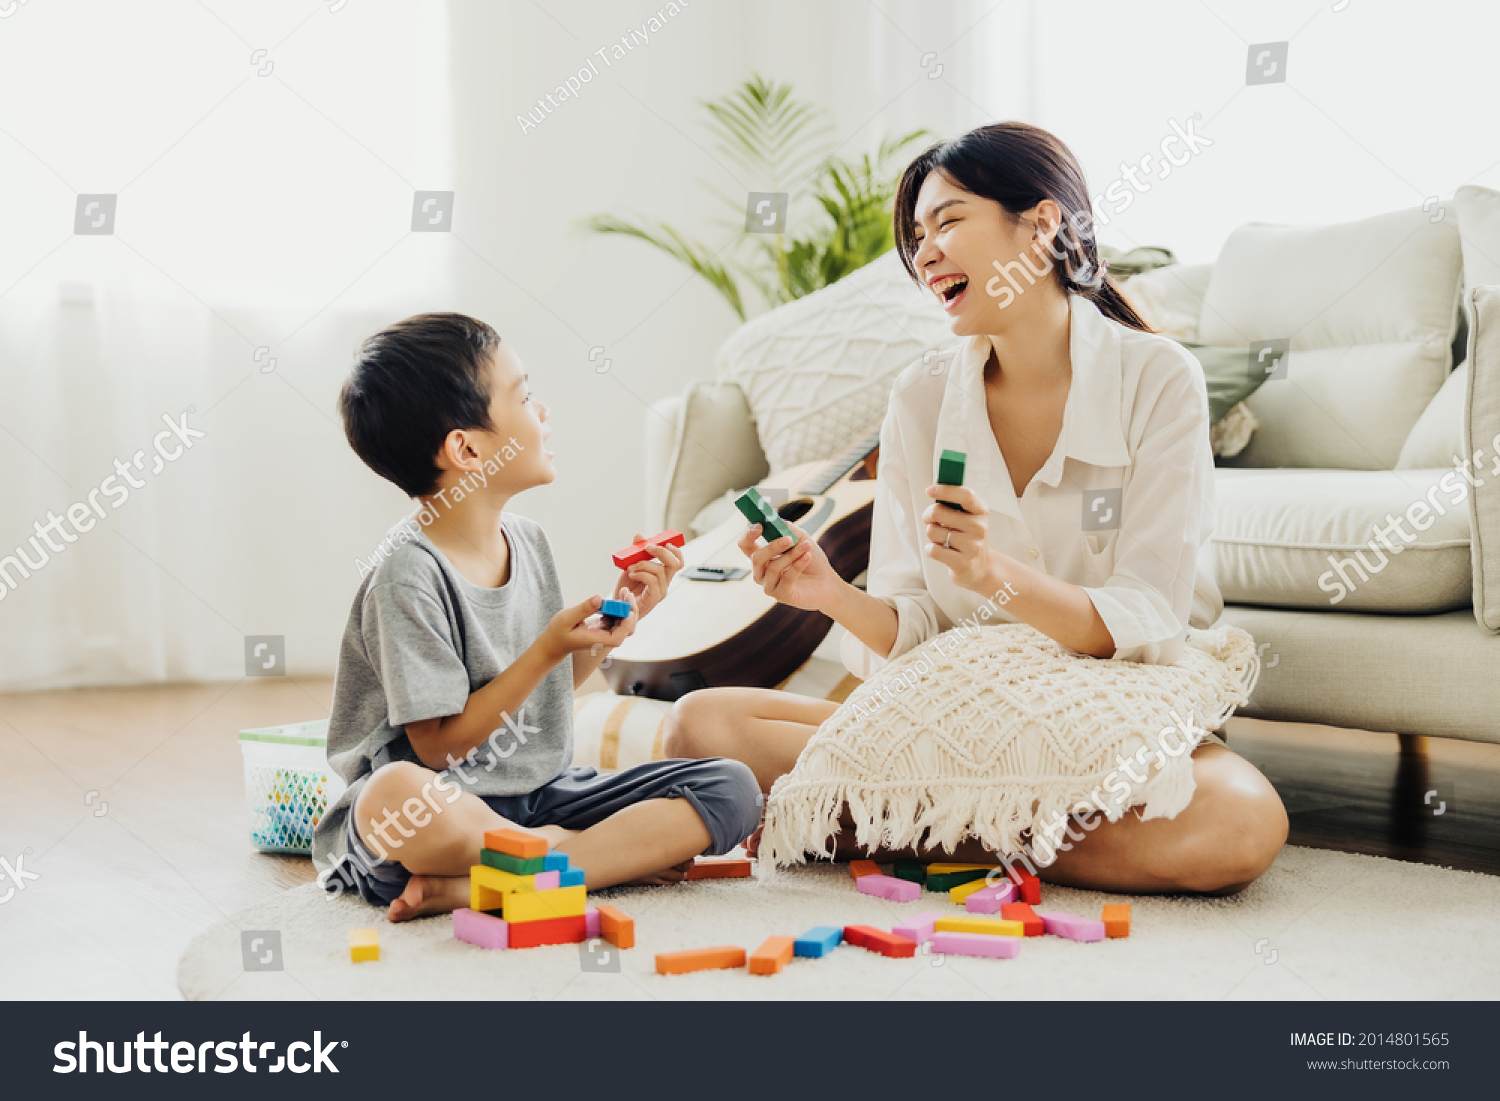 Cute Asian woman and kid playing educational toys together in living room. Mom and son play cubes and laugh Happy family. Young mother and son doing activities together at home. #2014801565